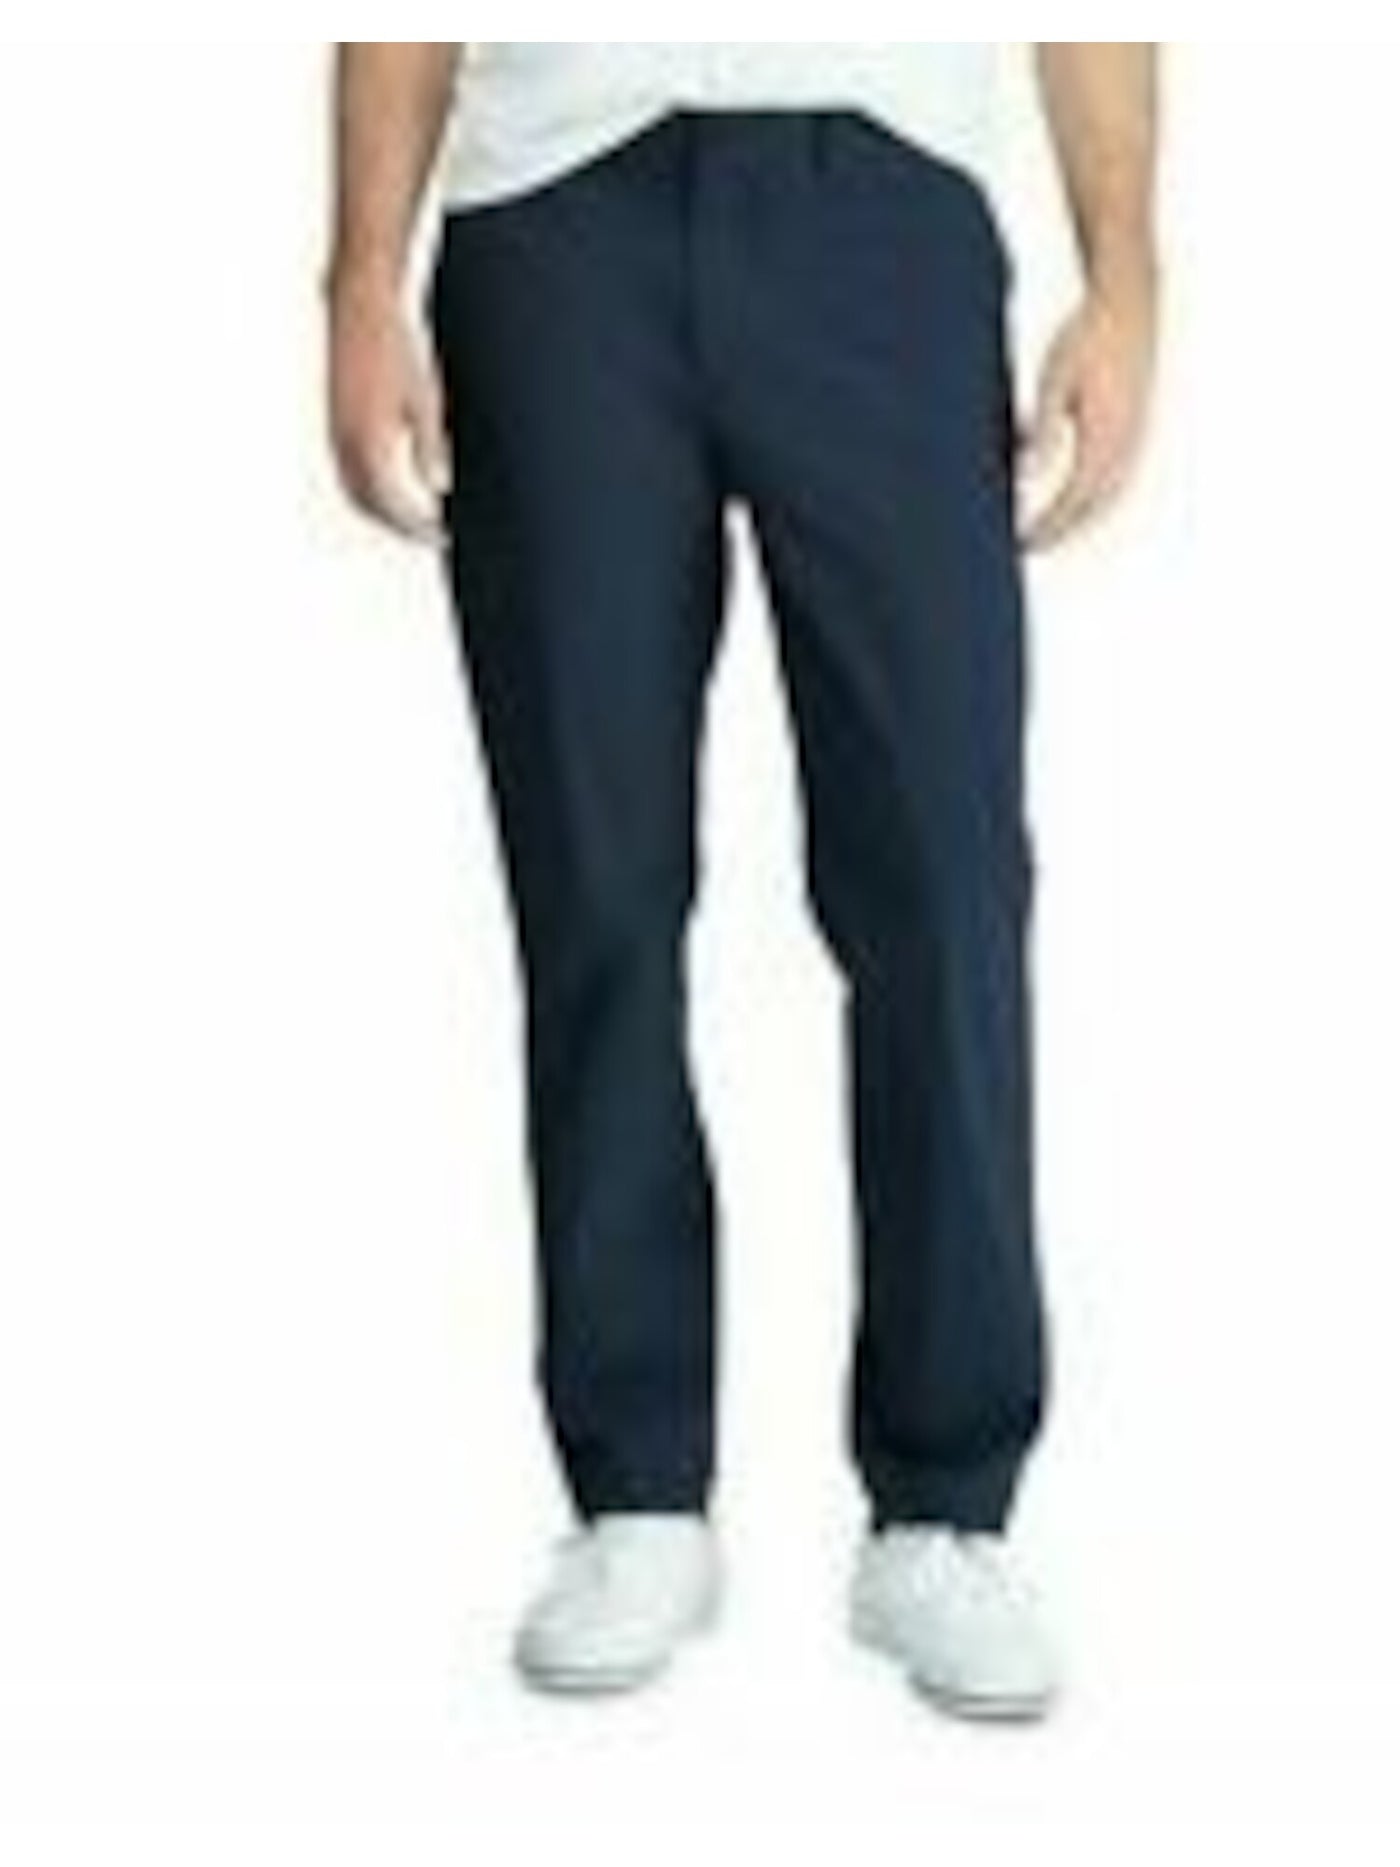 TORIN OPIFICIO Mens Teal Straight Leg, Classic Fit Cotton Blend Chino Pants 50